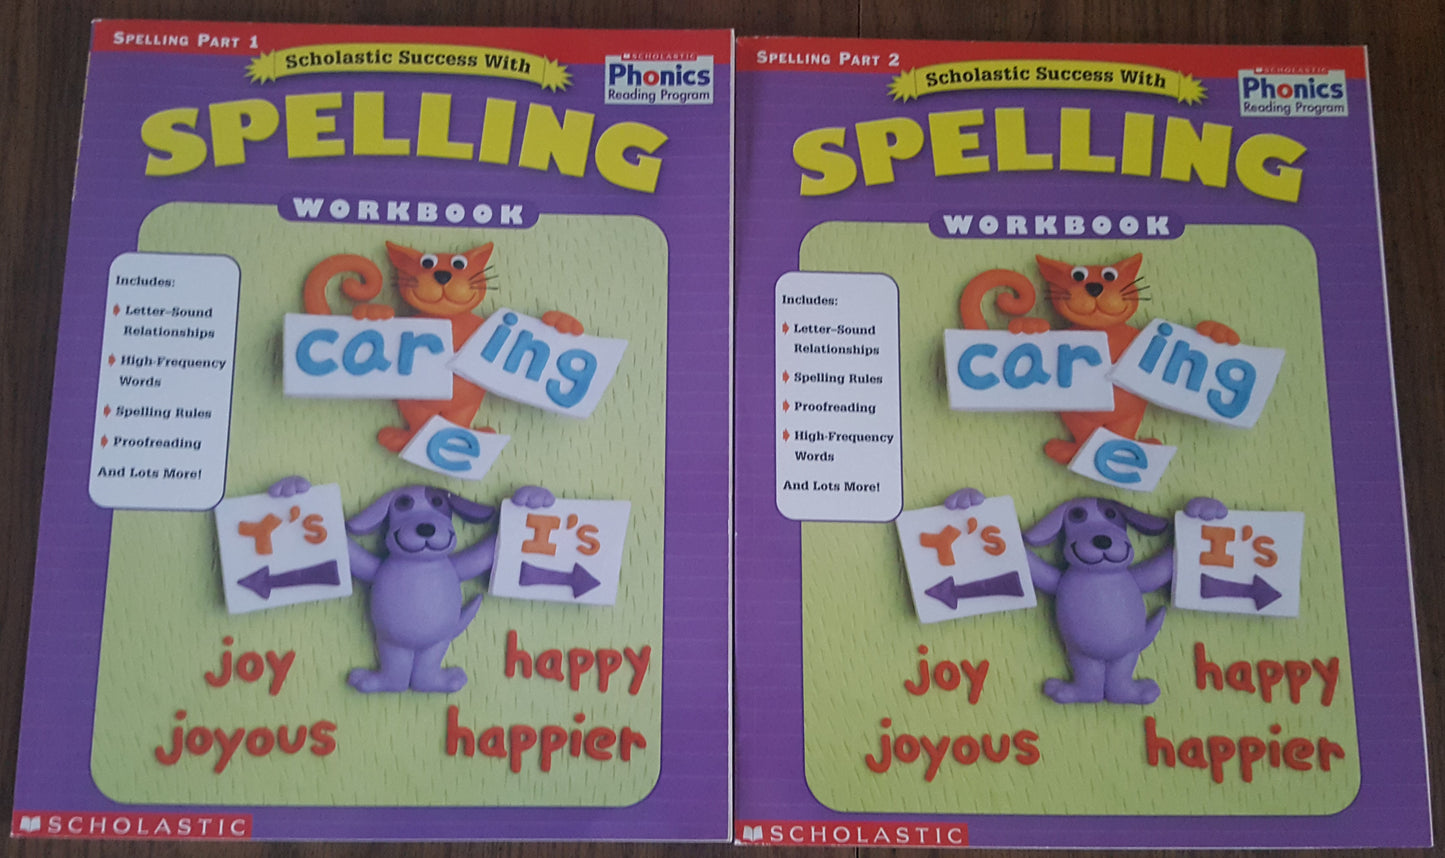 Scholastic Success with Spelling 2 book set